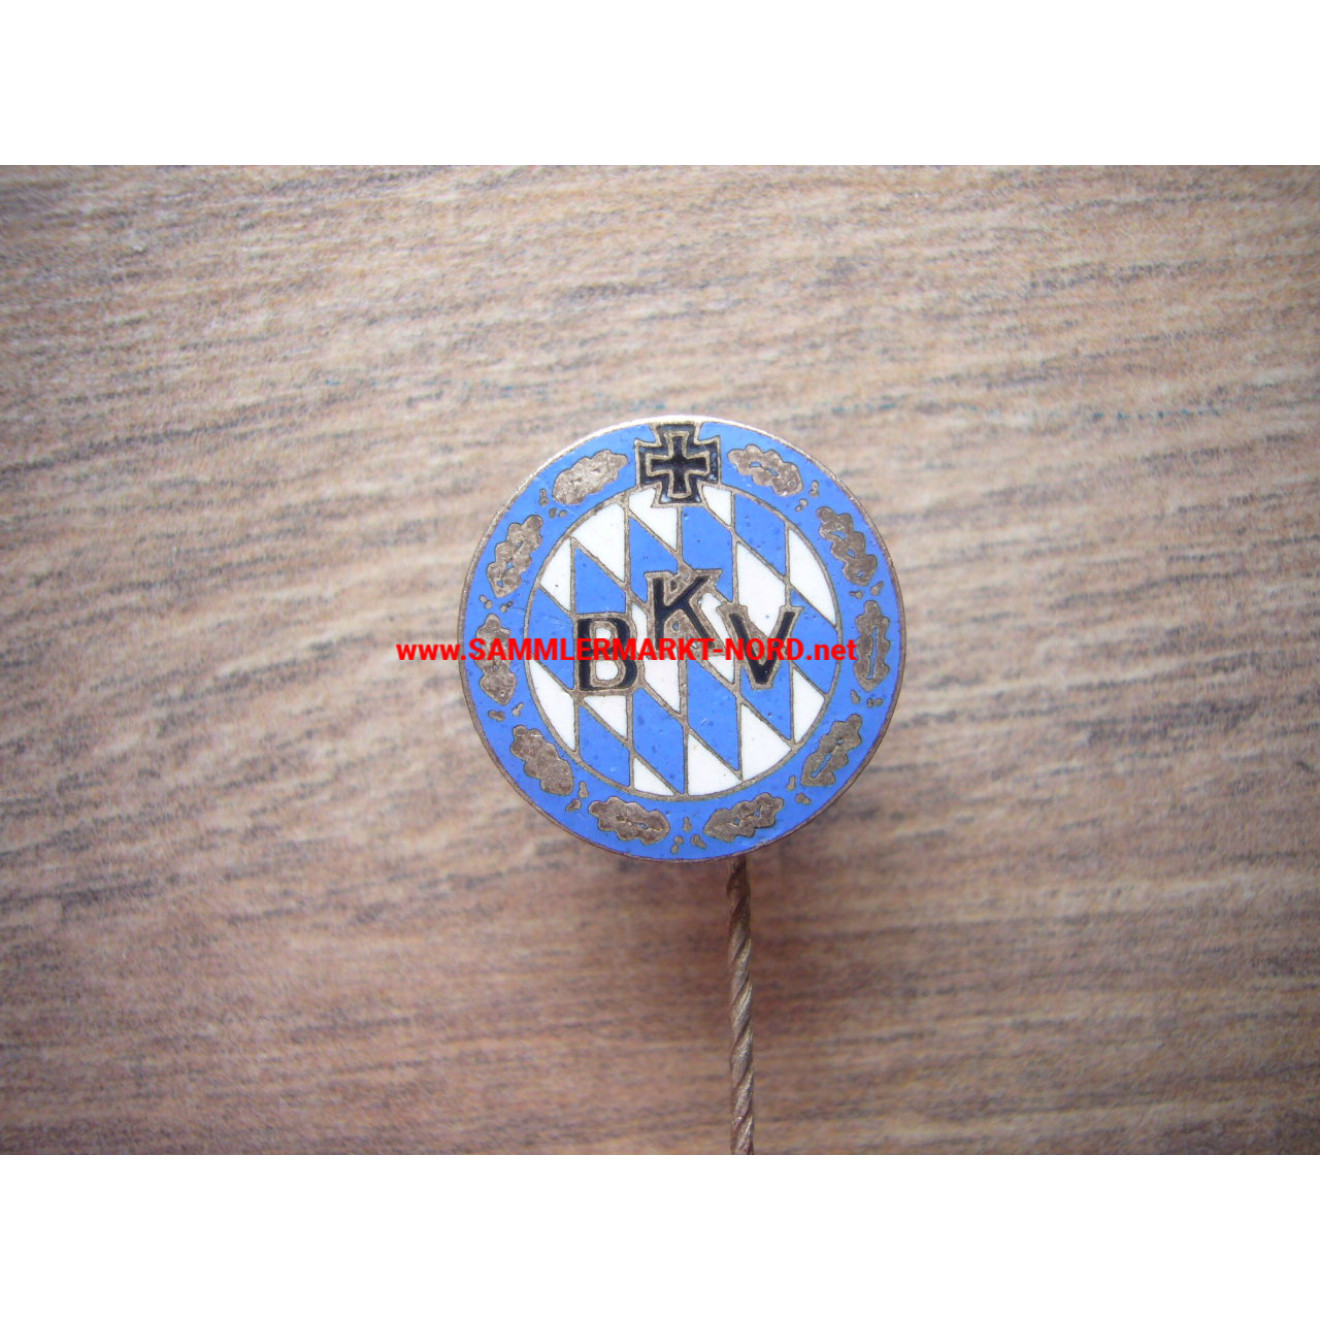 Bavarian Association of Comrades and Soldiers (BKV) - Member pin